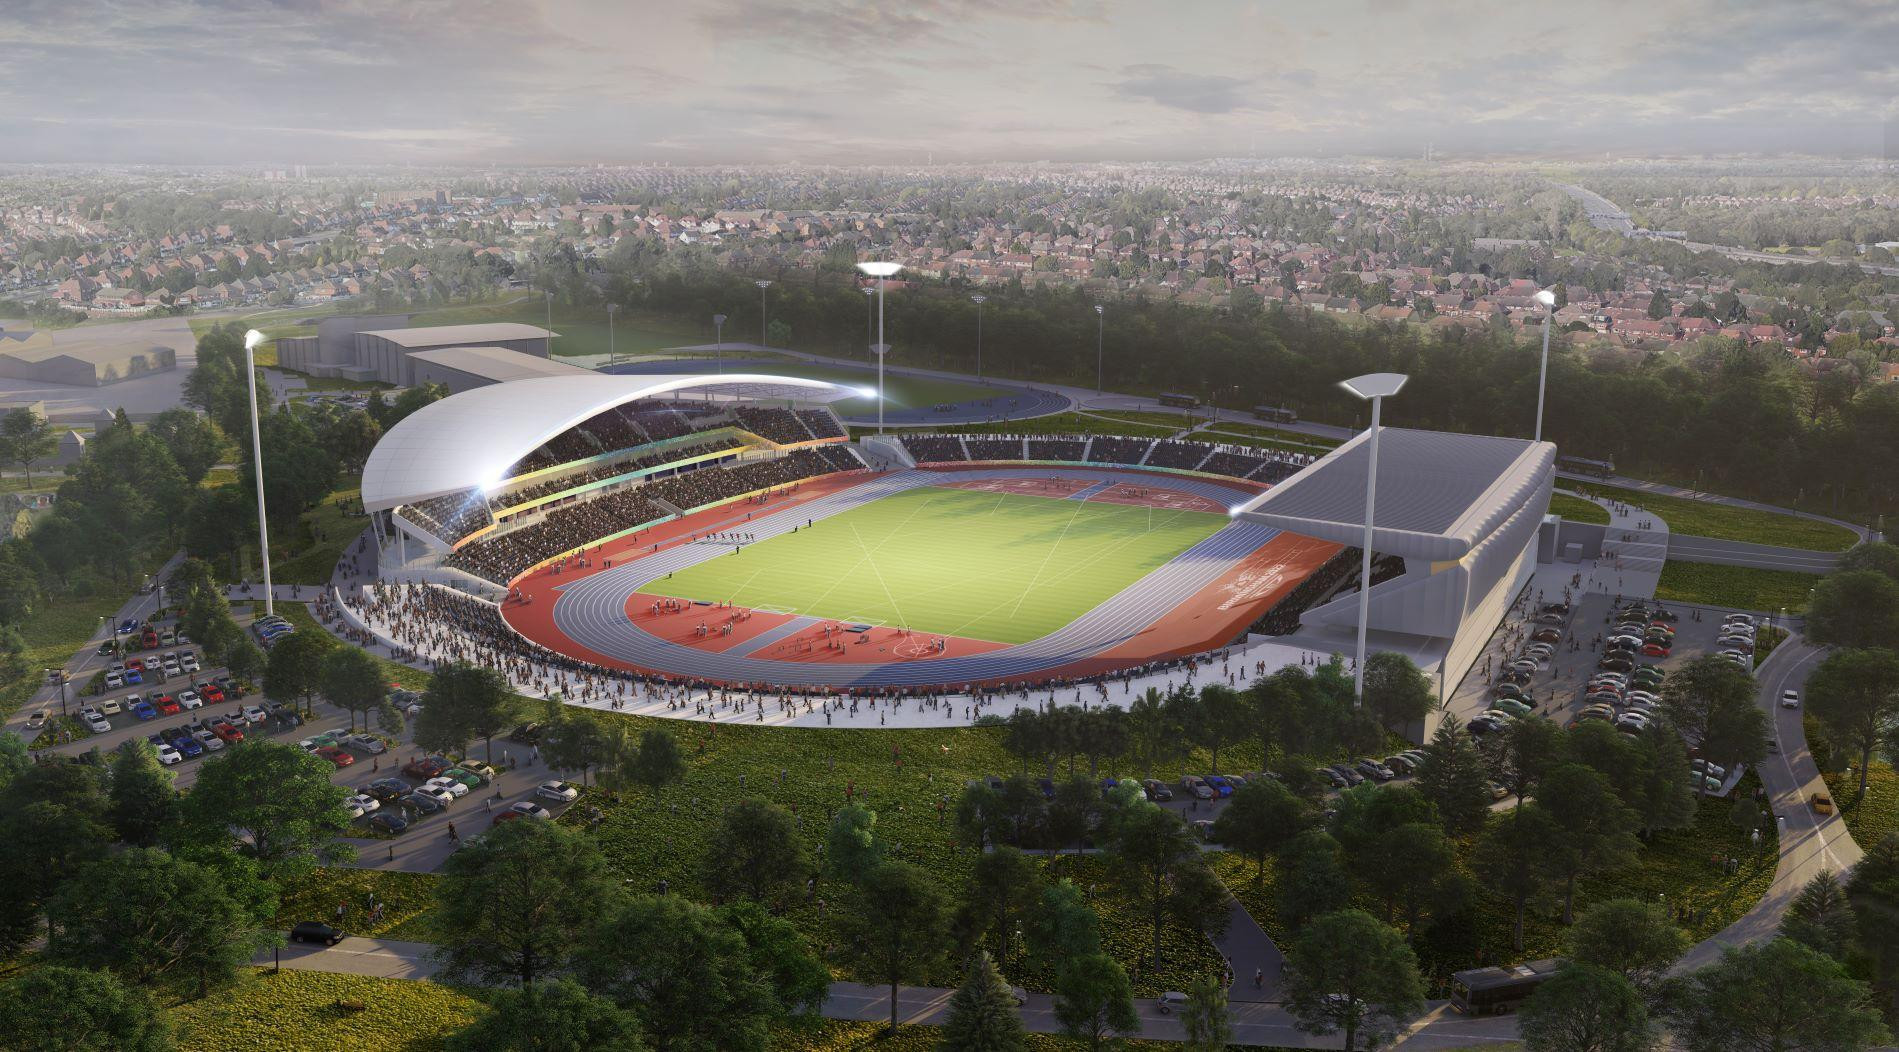 The completion date for work to revamp the Alexander Stadium in Birmingham has been pushed back to March 31 2022 - just three months before the Games ©Getty Images